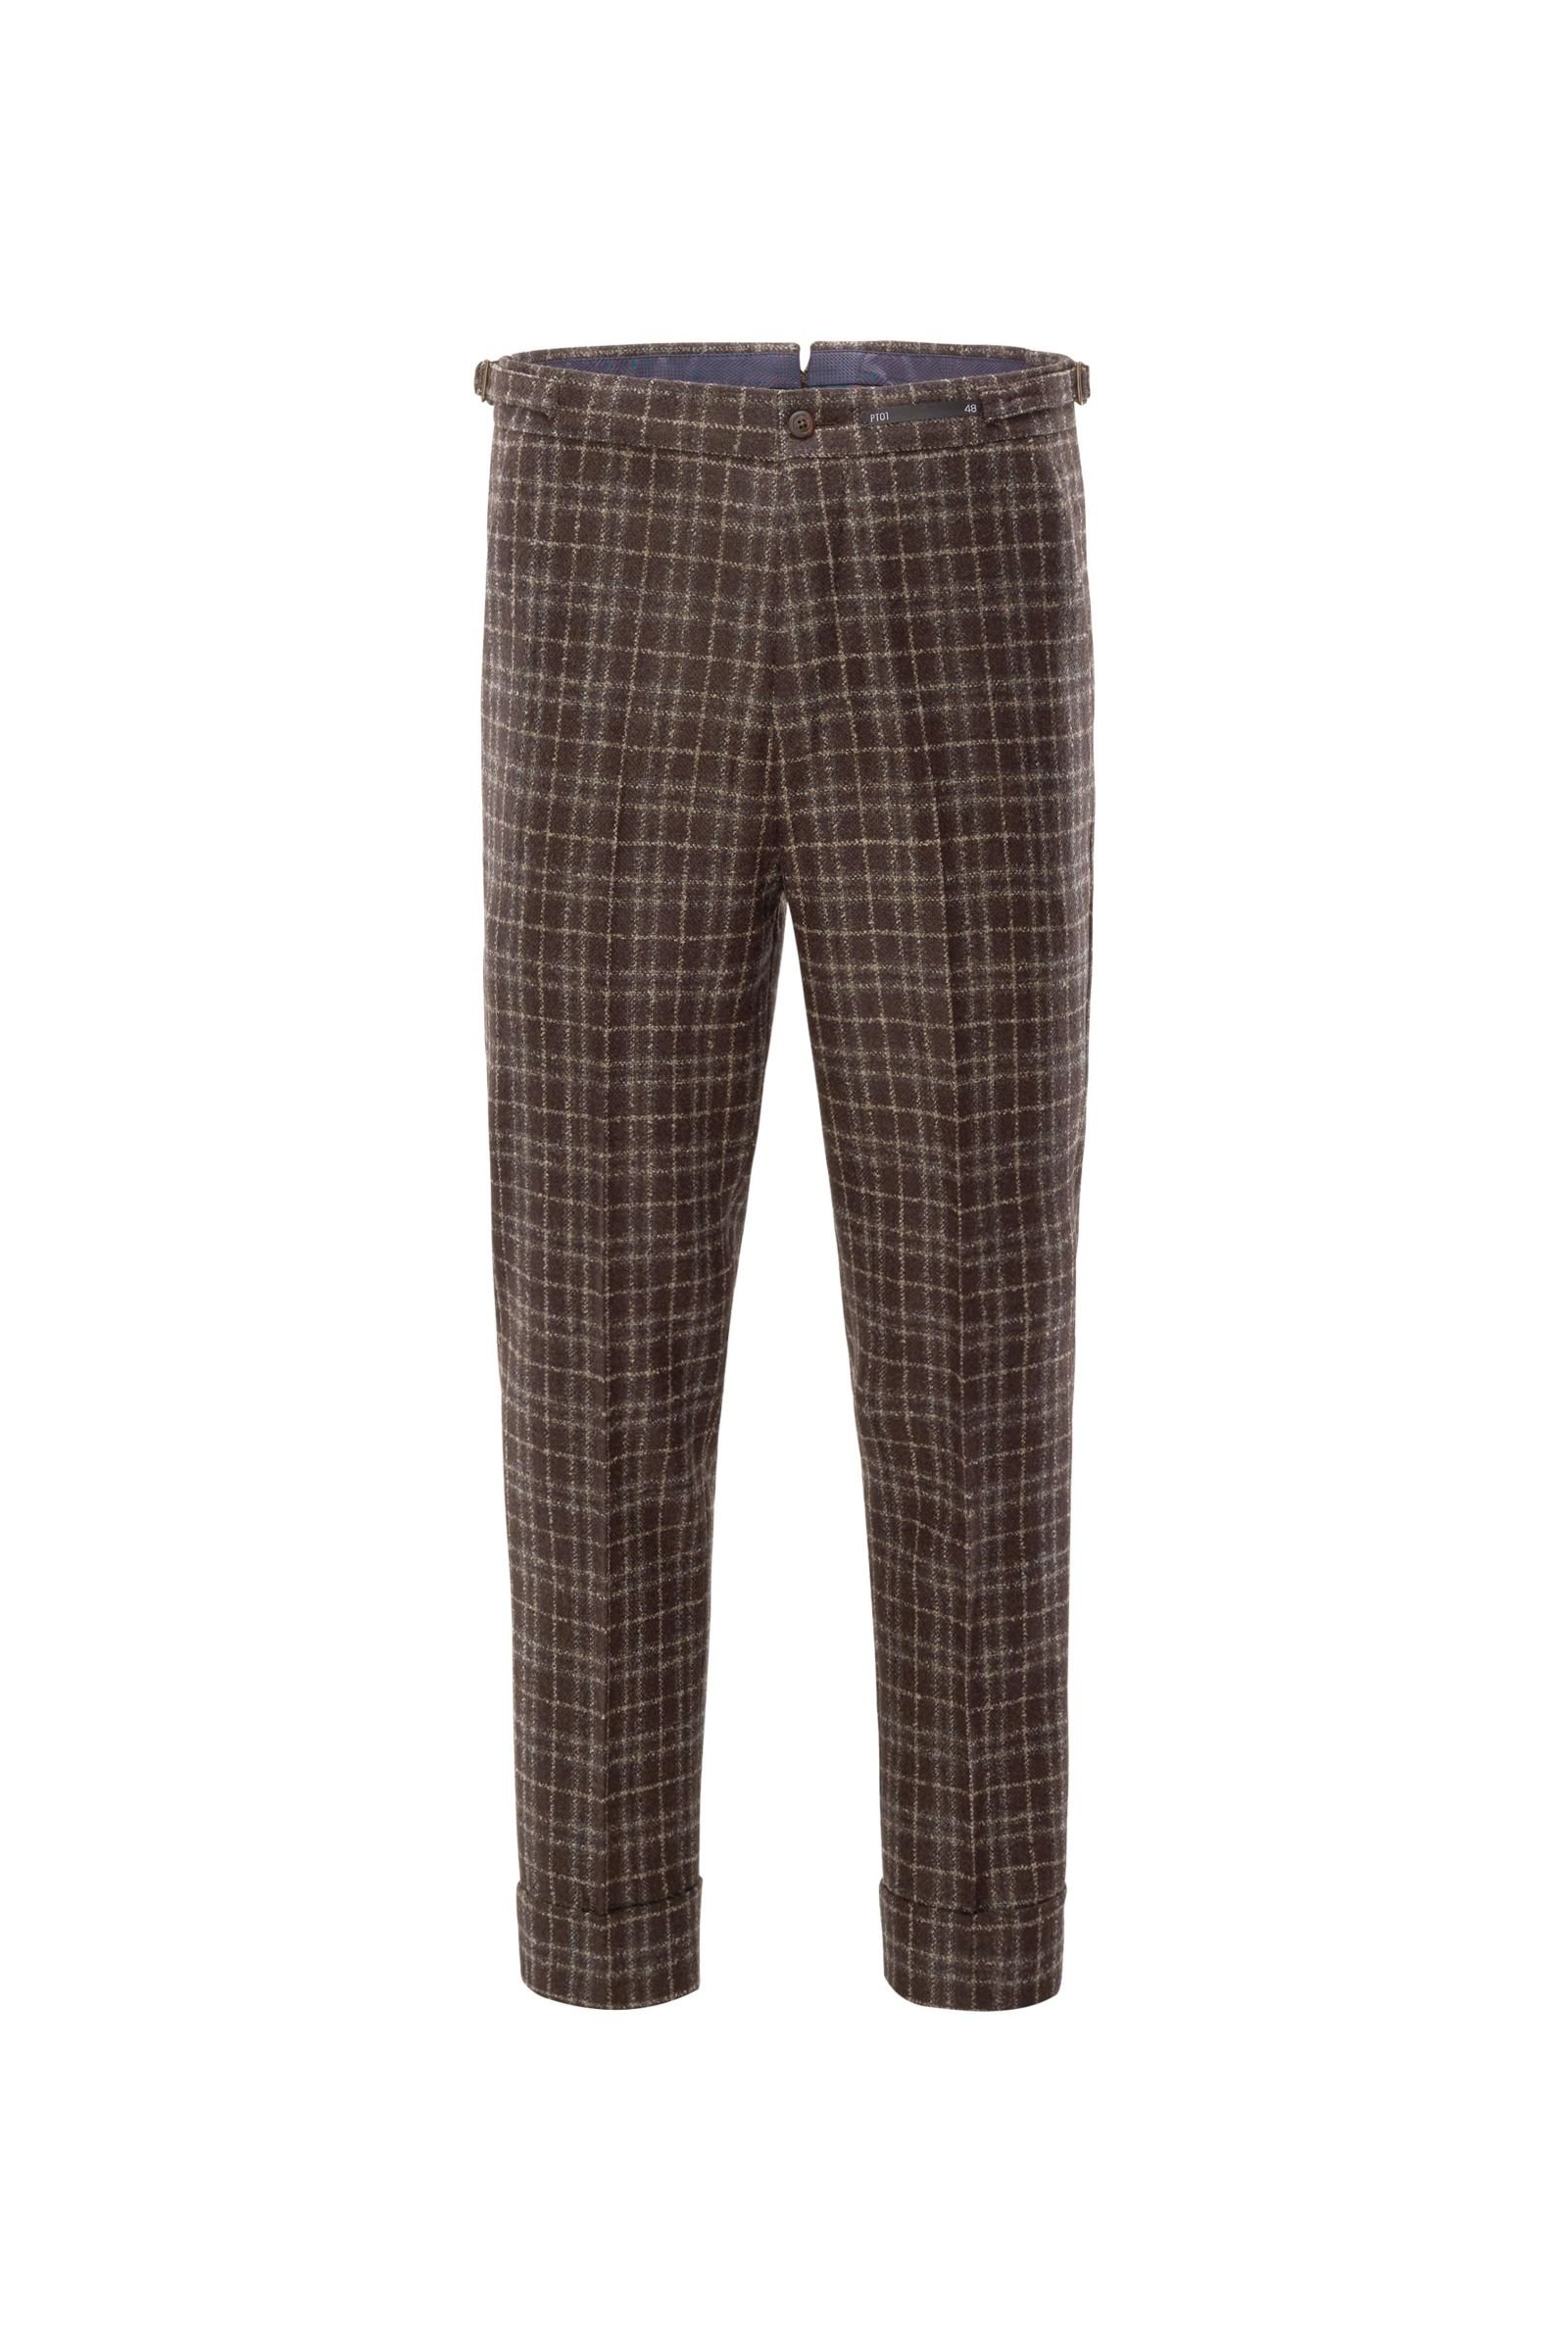 Wool trousers 'Preppy Fit' dark brown checked